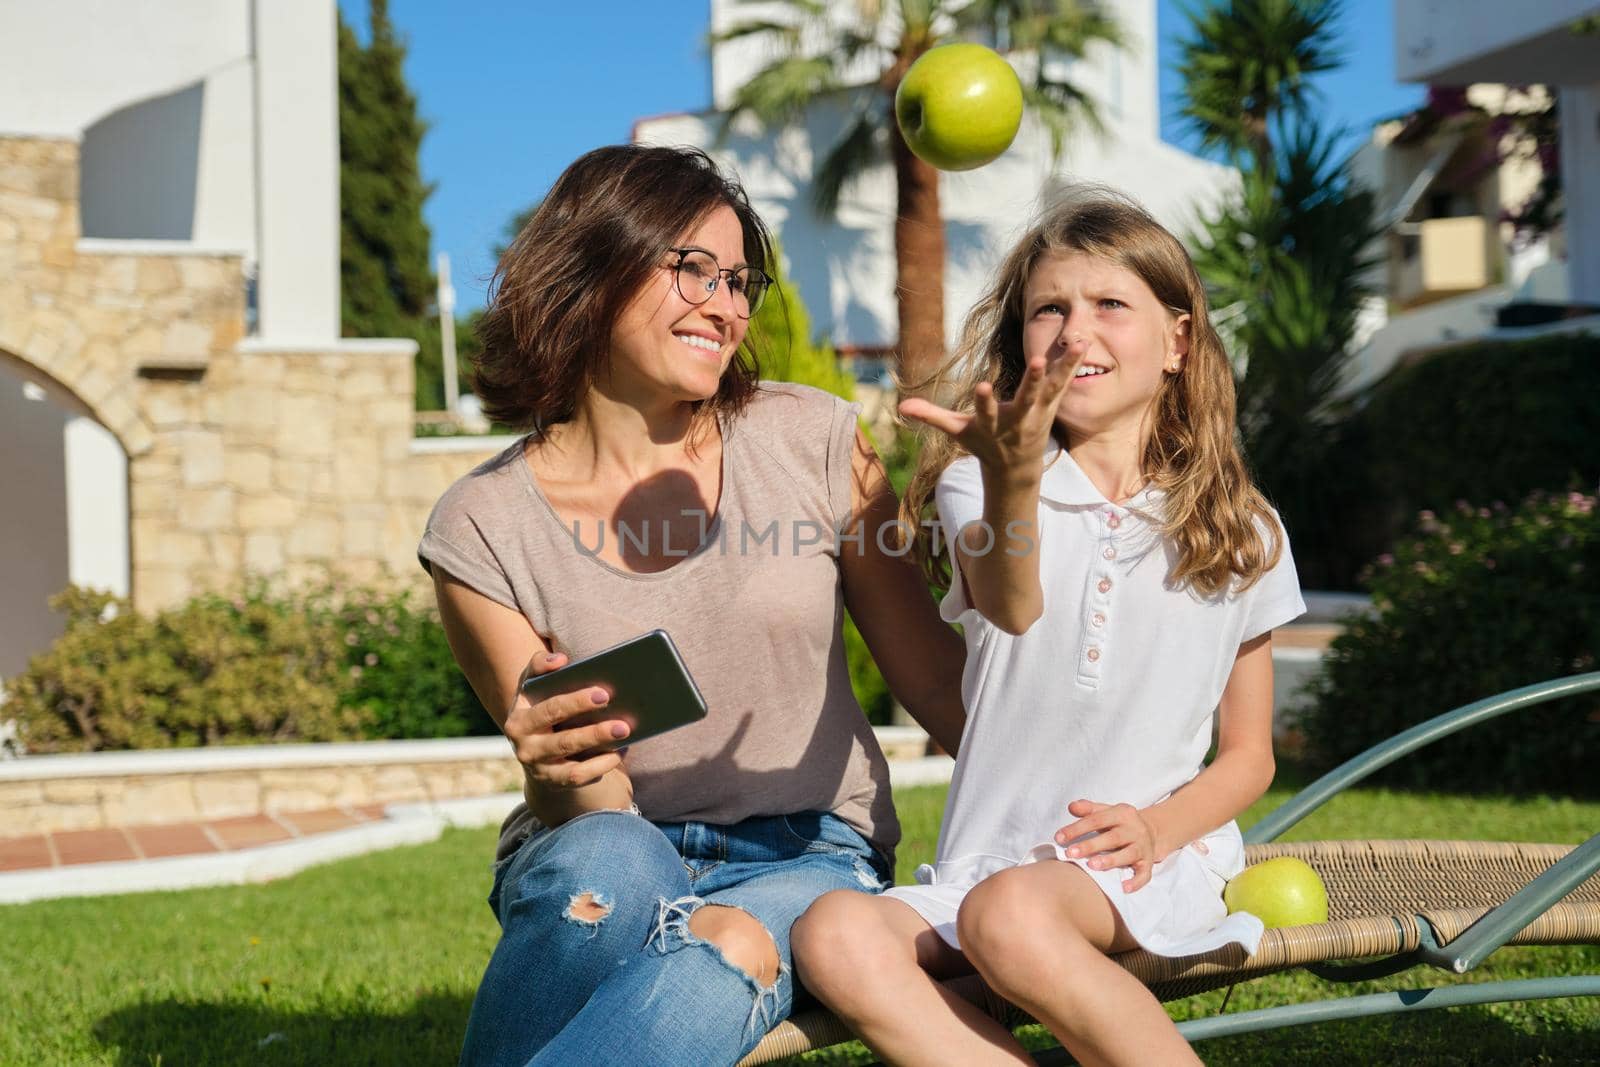 Mom and daughter child rest together sitting in an outdoor chair on the lawn, girl having fun with an apple